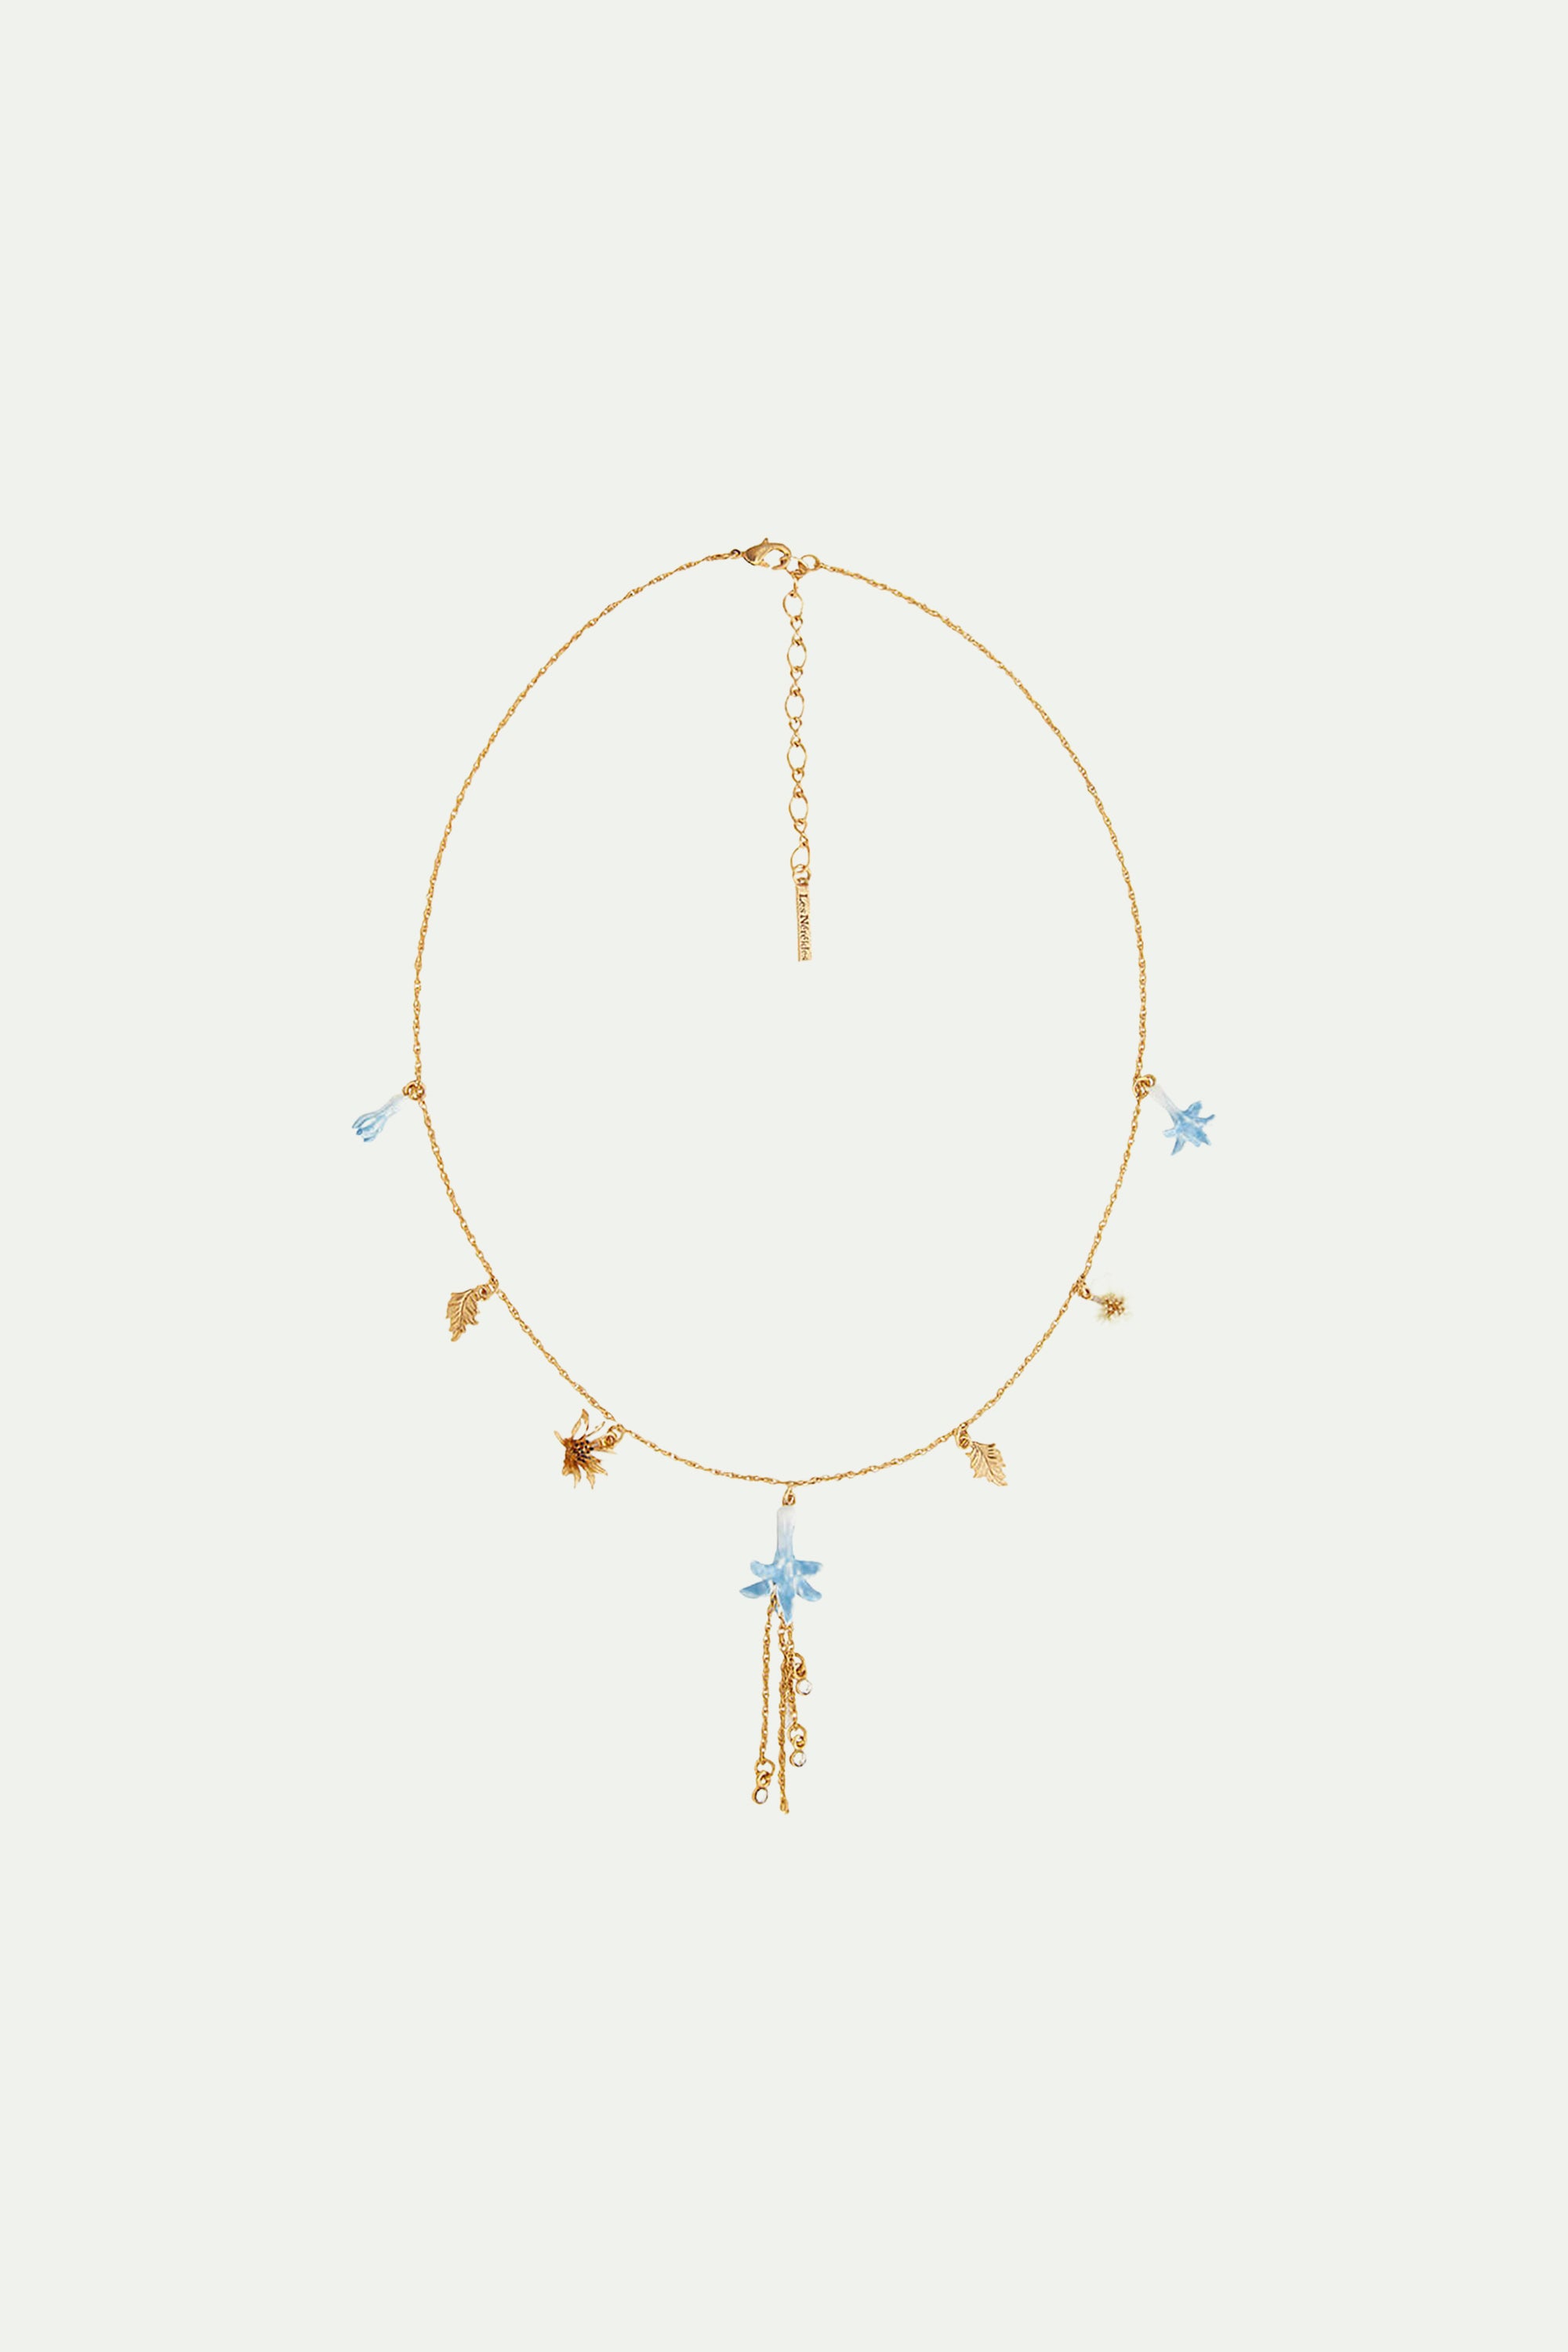 White, gold and blue flower pendant necklace